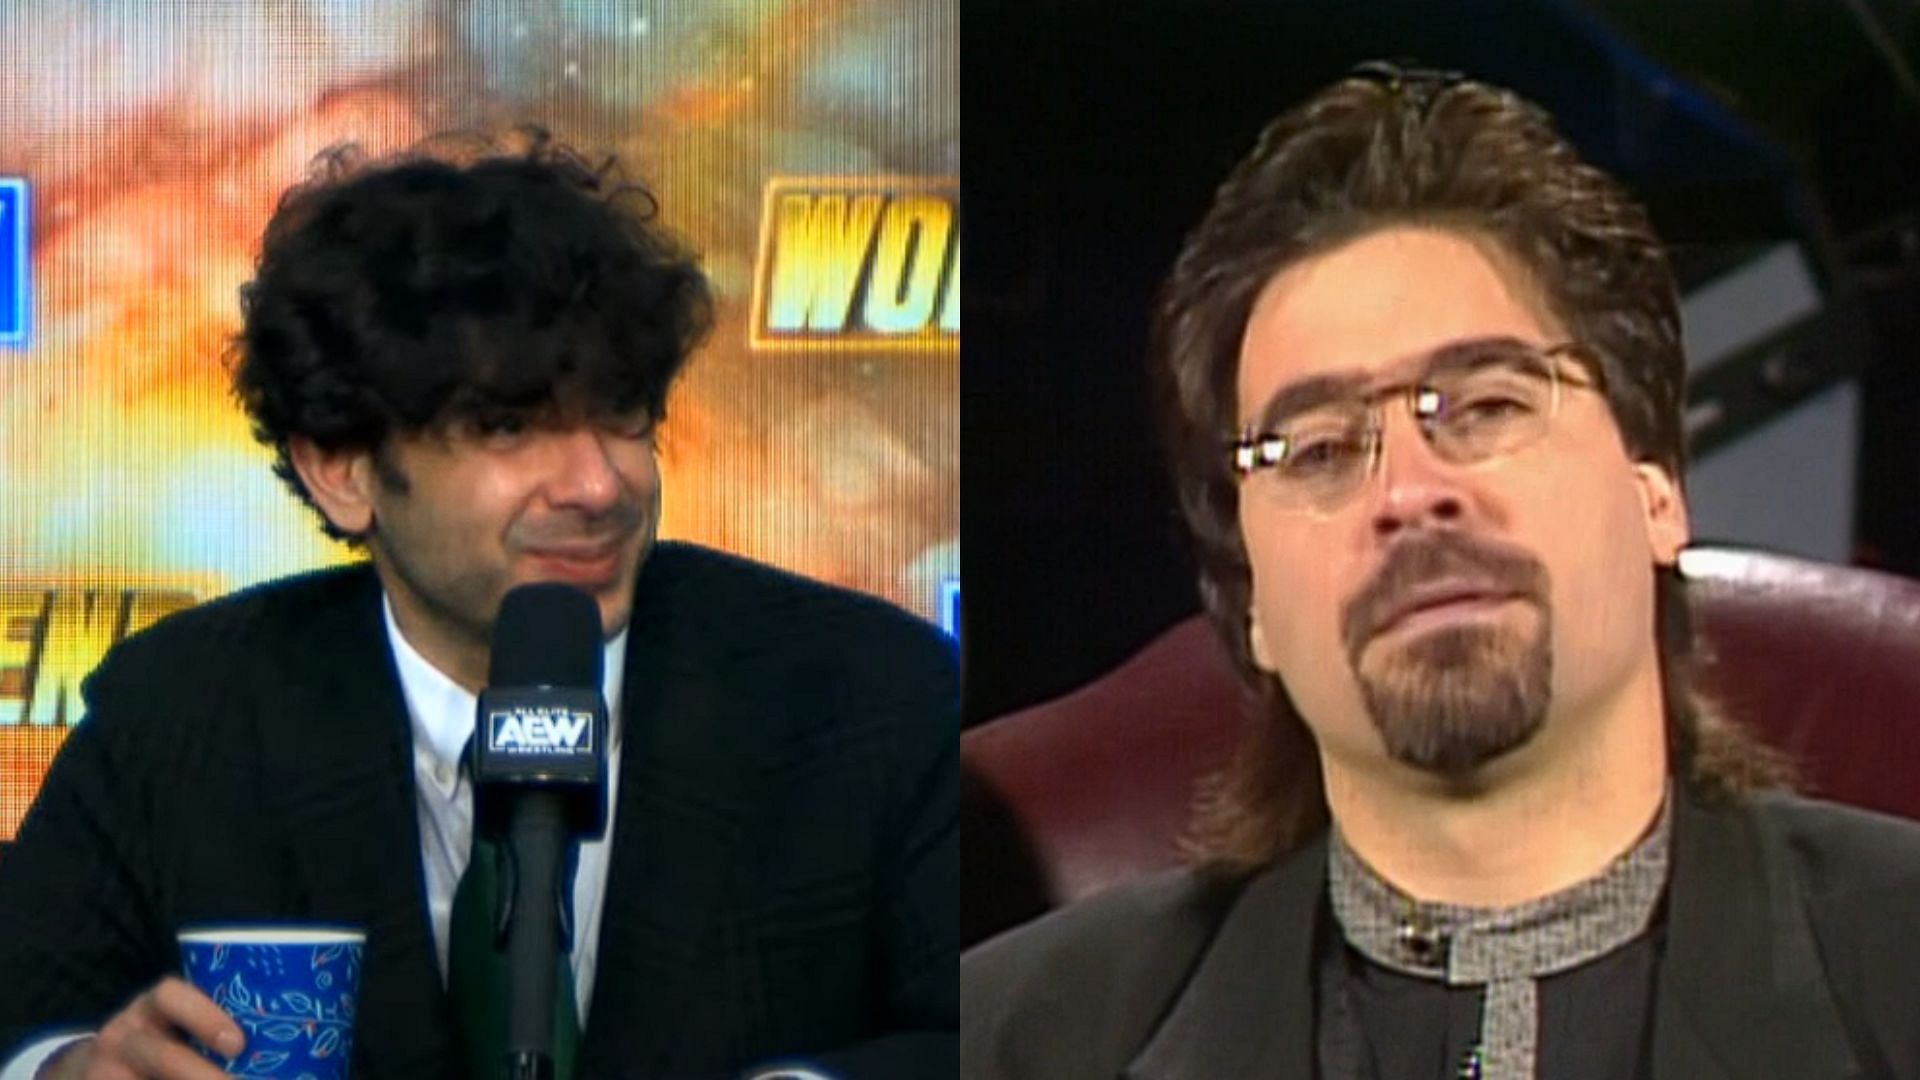 Tony Khan (left) [Screenshot taken from Worlds End Media Scrum on AEW Official YouTube Channel] and Vince Russo (right) [Screenshot taken from WWE